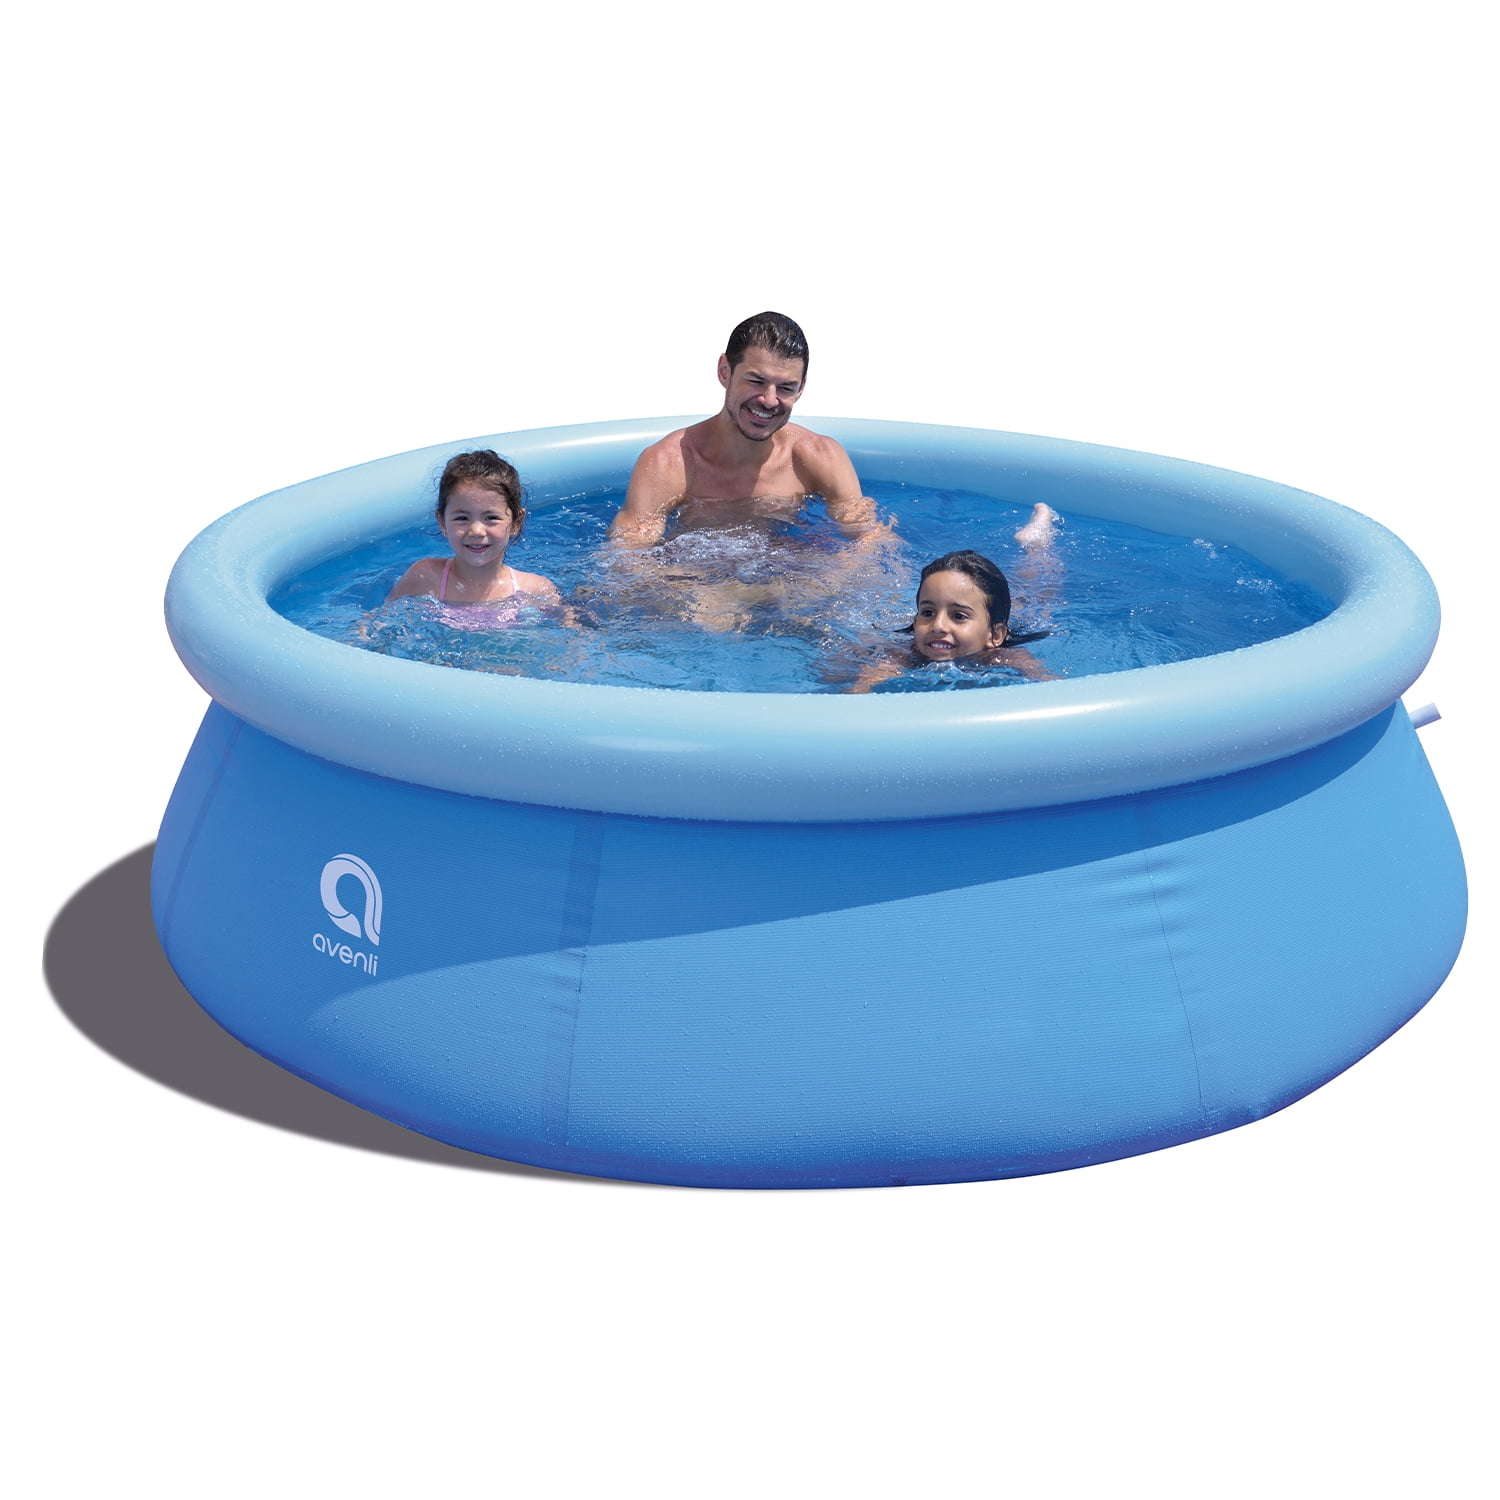 Kids outdoor 3 ring pool choose colour pink yellow blue new in original packagin 